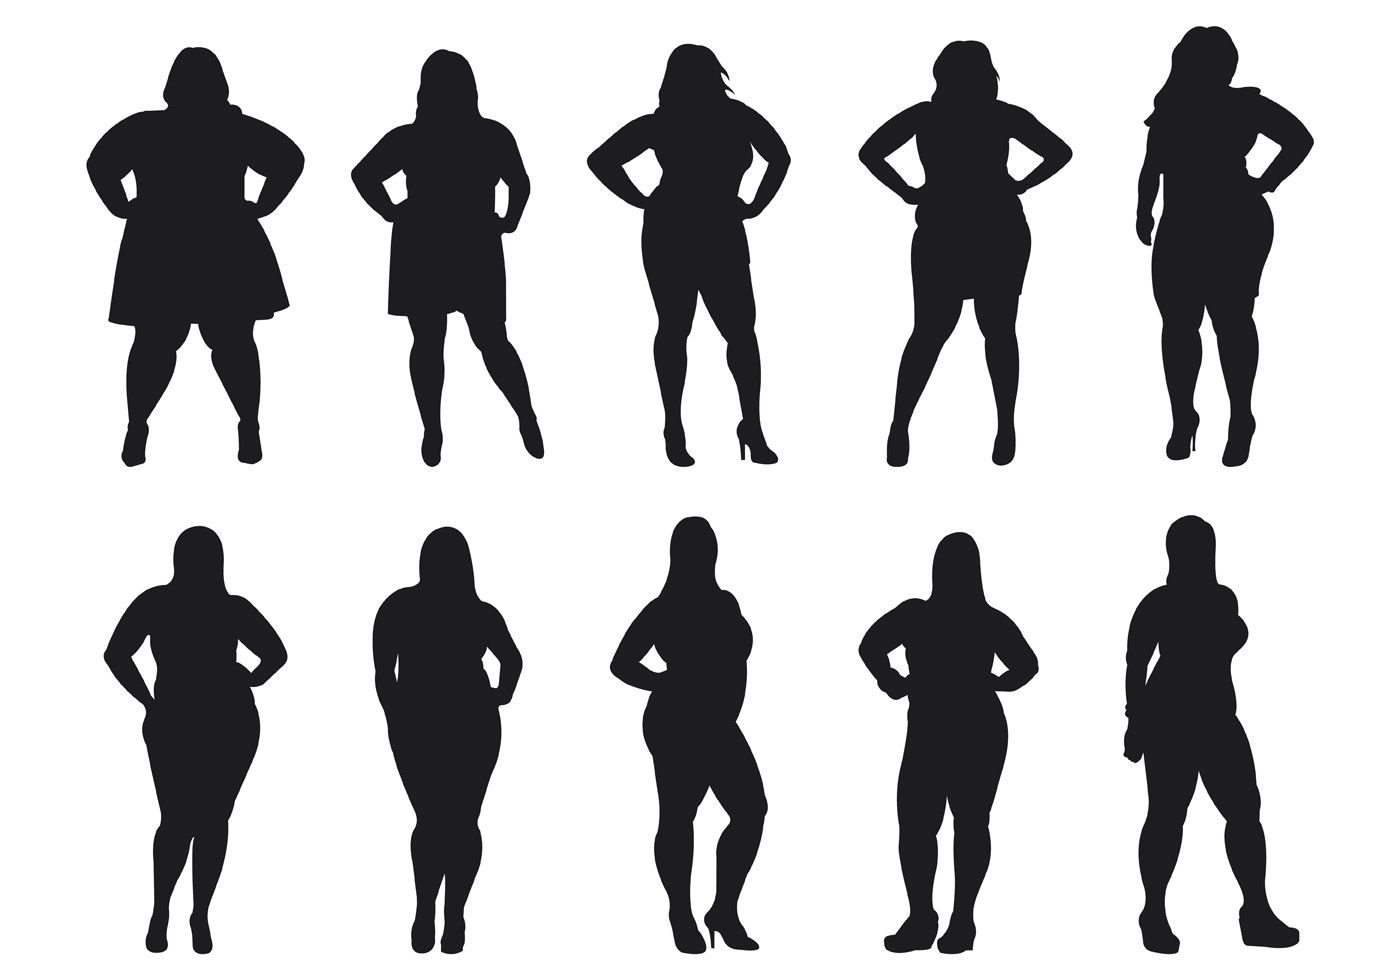 Download Fat Women Silhouettes Vector - Download Free Vector Art, Stock Graphics & Images